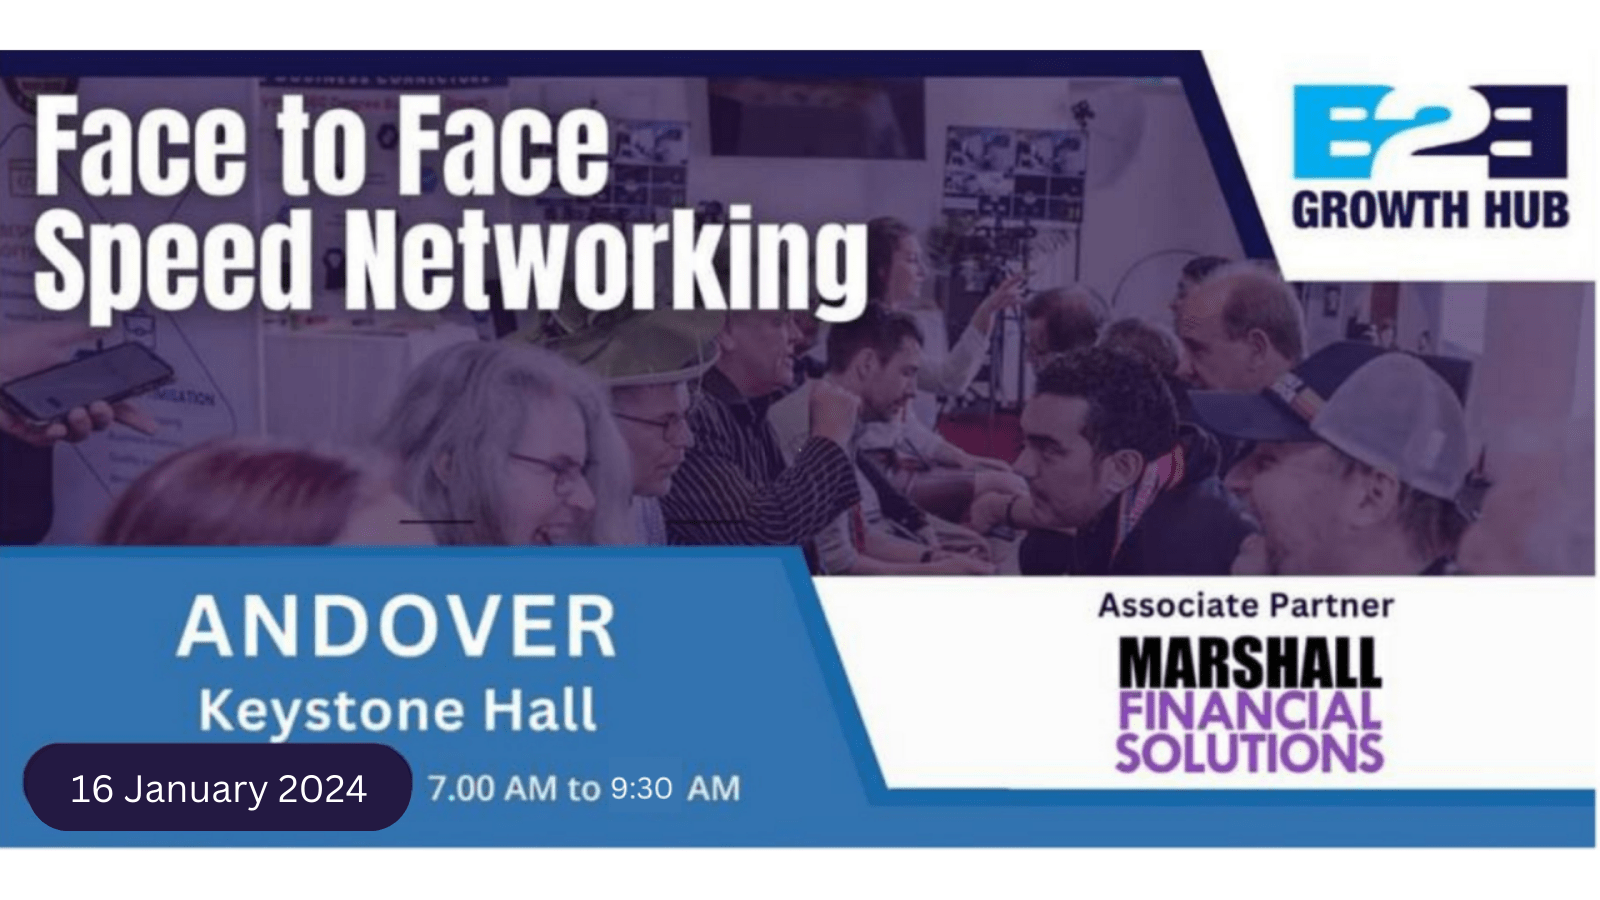 Andover Face 2 Face Morning Speed Networking - 16th Jan 2024